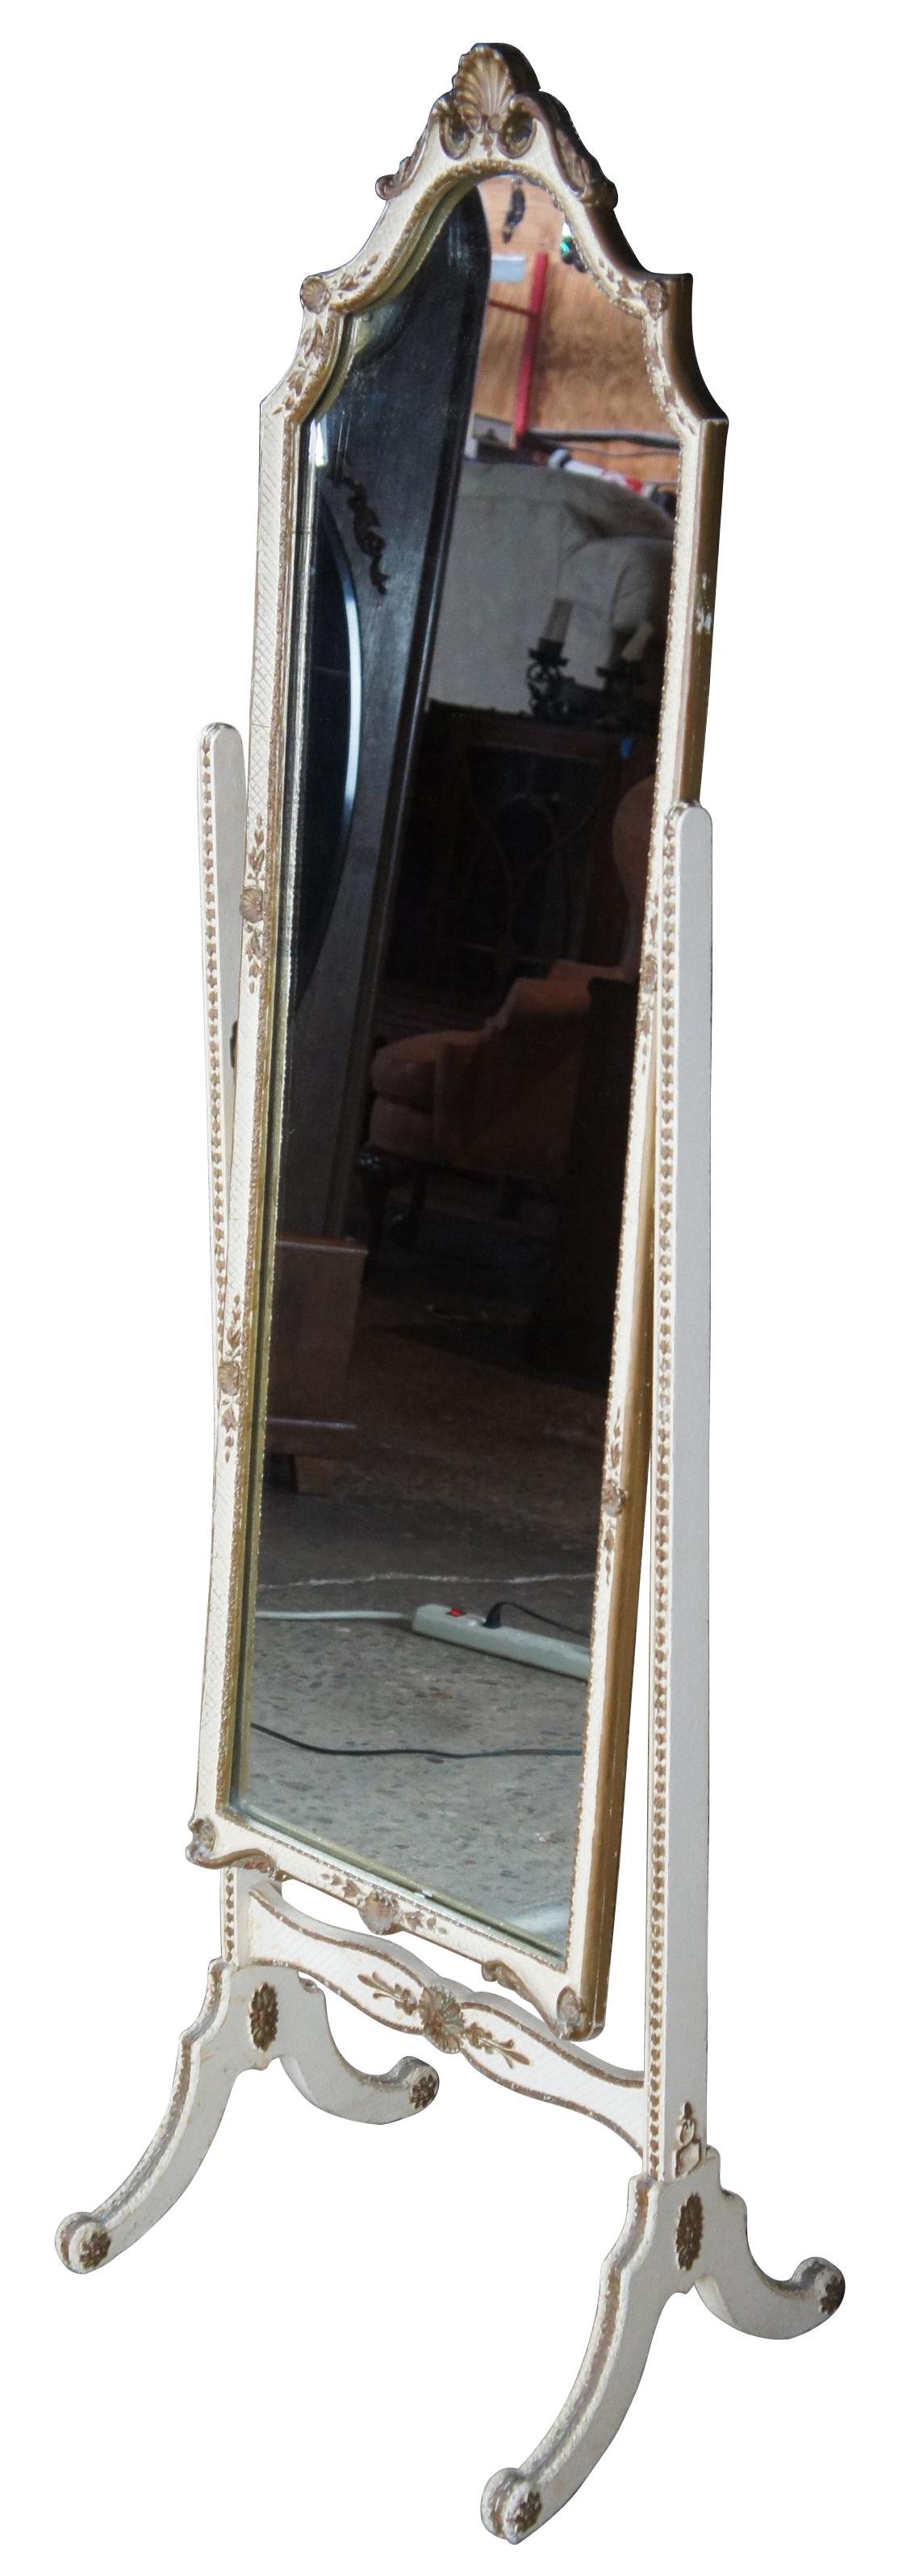 Antique circa 1940s French Provincial Cheval mirror. White with scalloped gold trim.
  